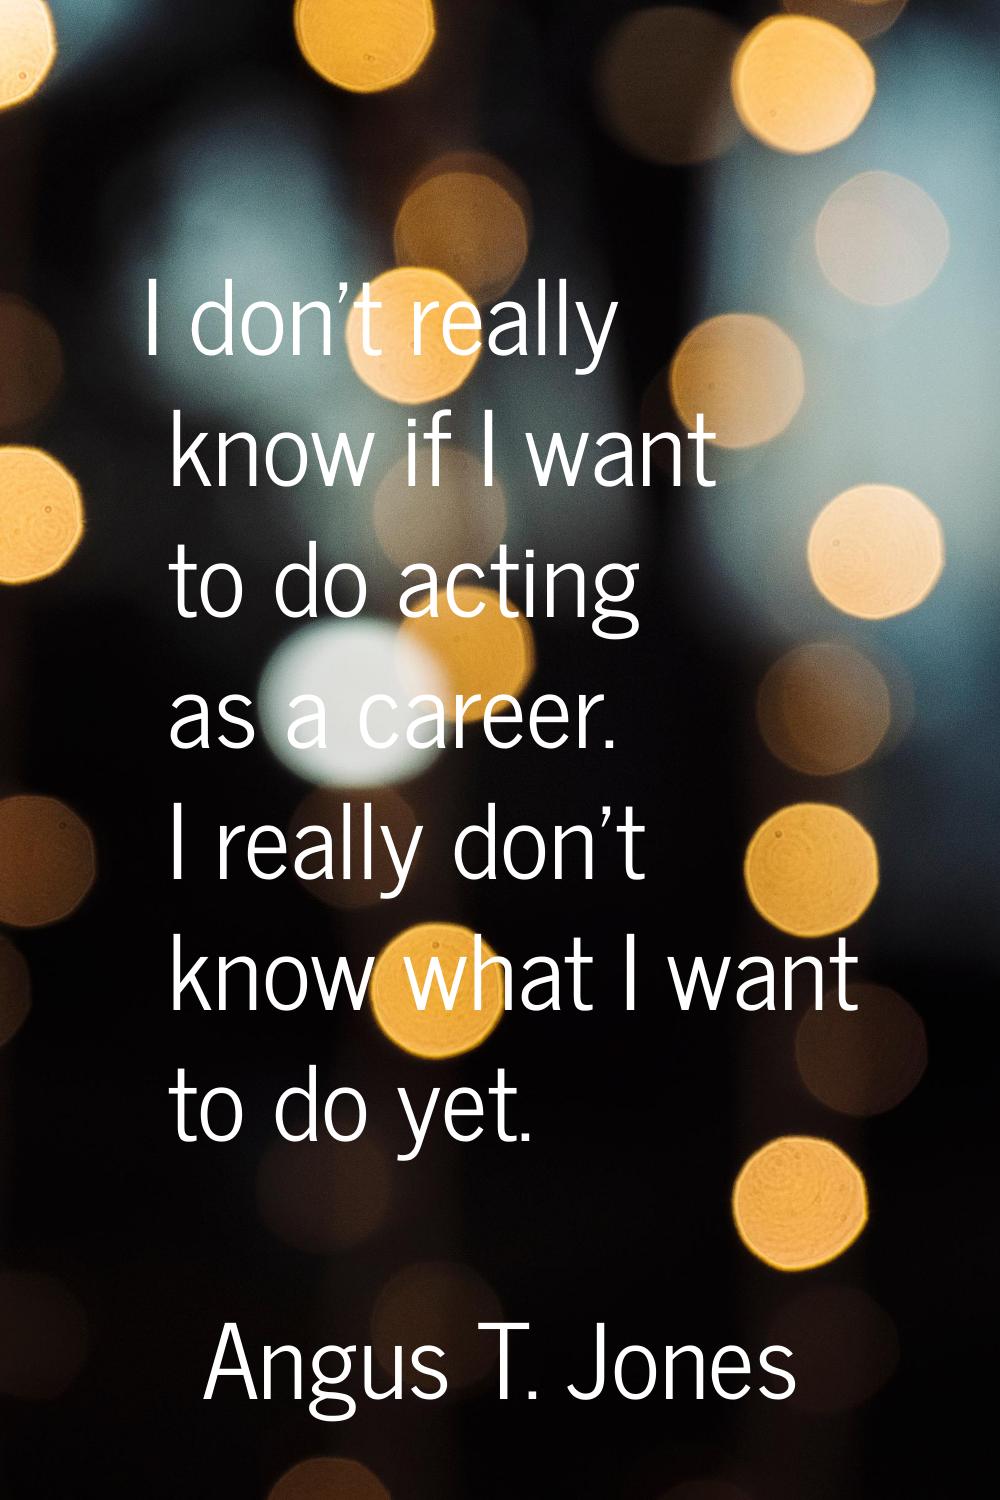 I don't really know if I want to do acting as a career. I really don't know what I want to do yet.